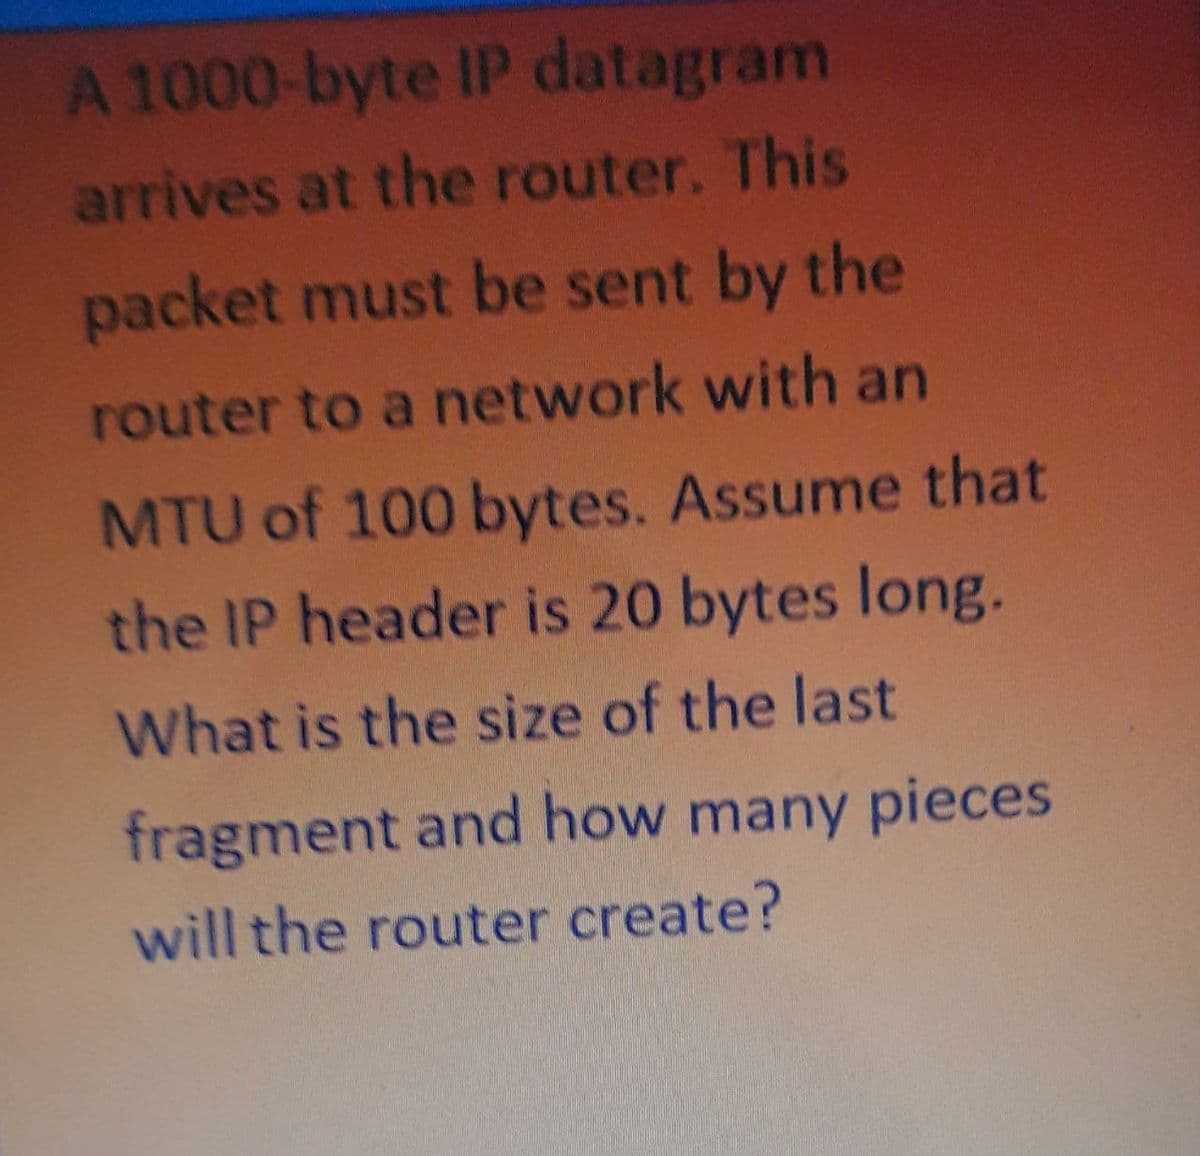 A 1000-byte IP datagram
arrives at the router. This
packet must be sent by the
router to a network with an
MTU of 100 bytes. Assume that
the IP header is 20 bytes long.
What is the size of the last
fragment and how many pieces
will the router create?
